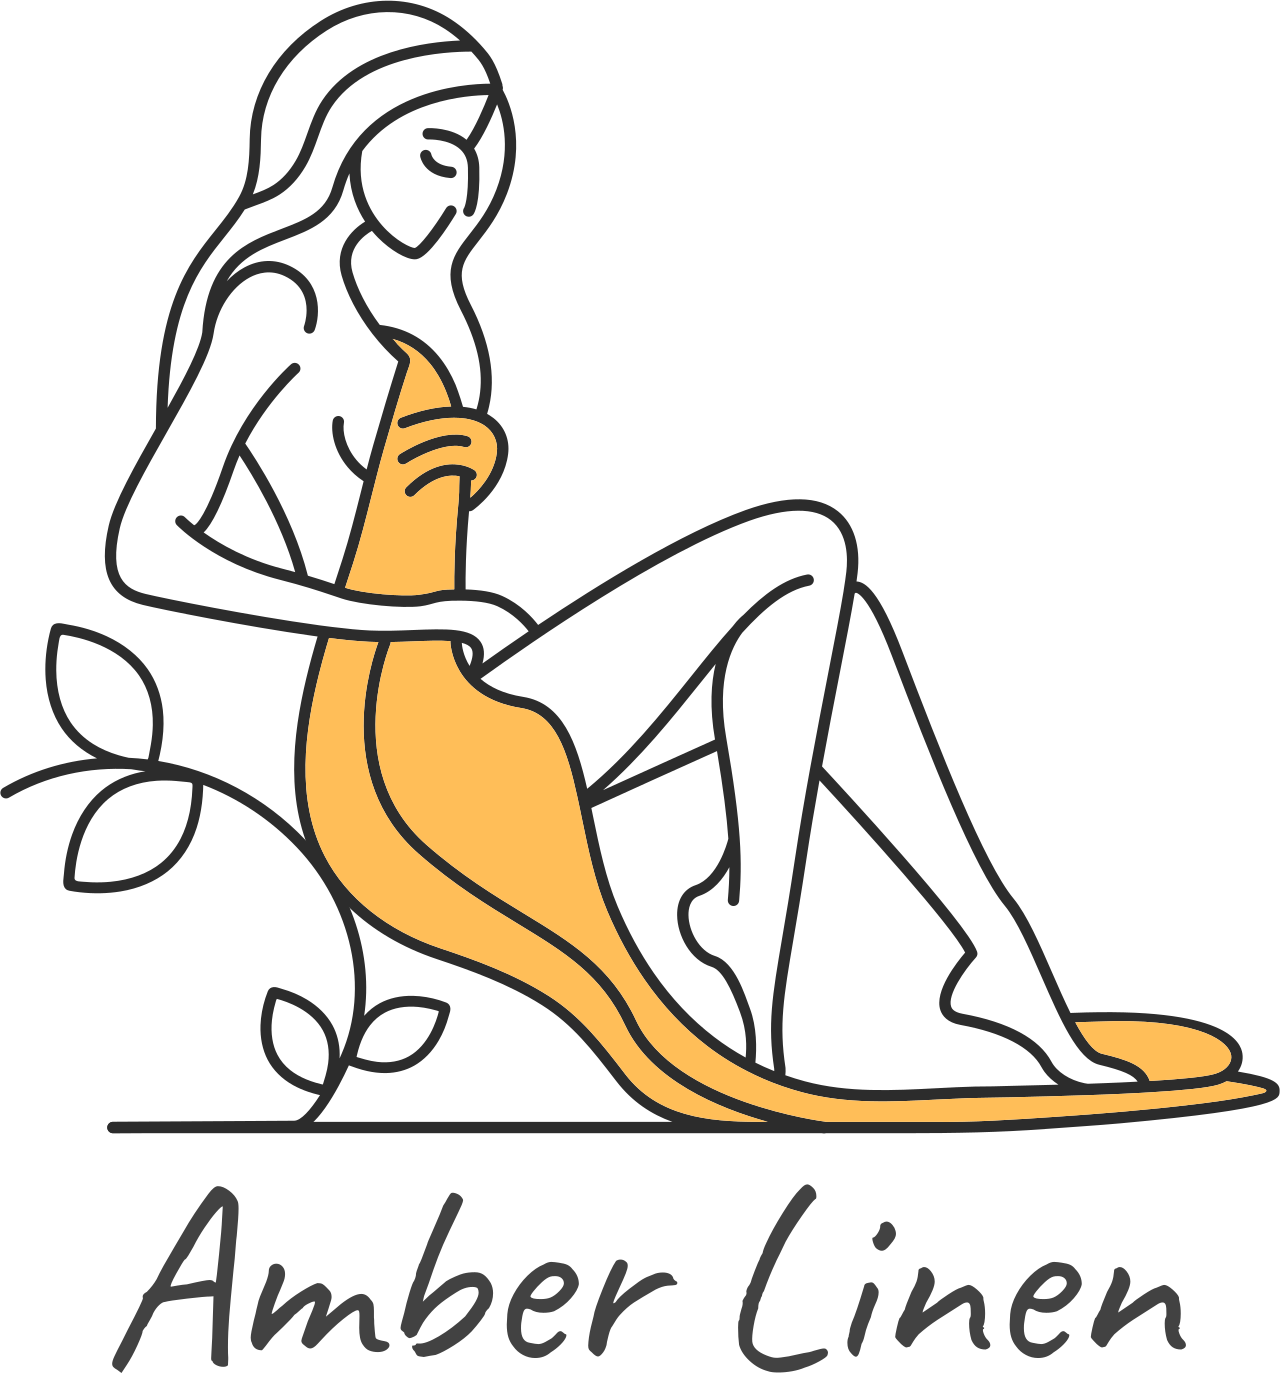 Amber Linen's web page